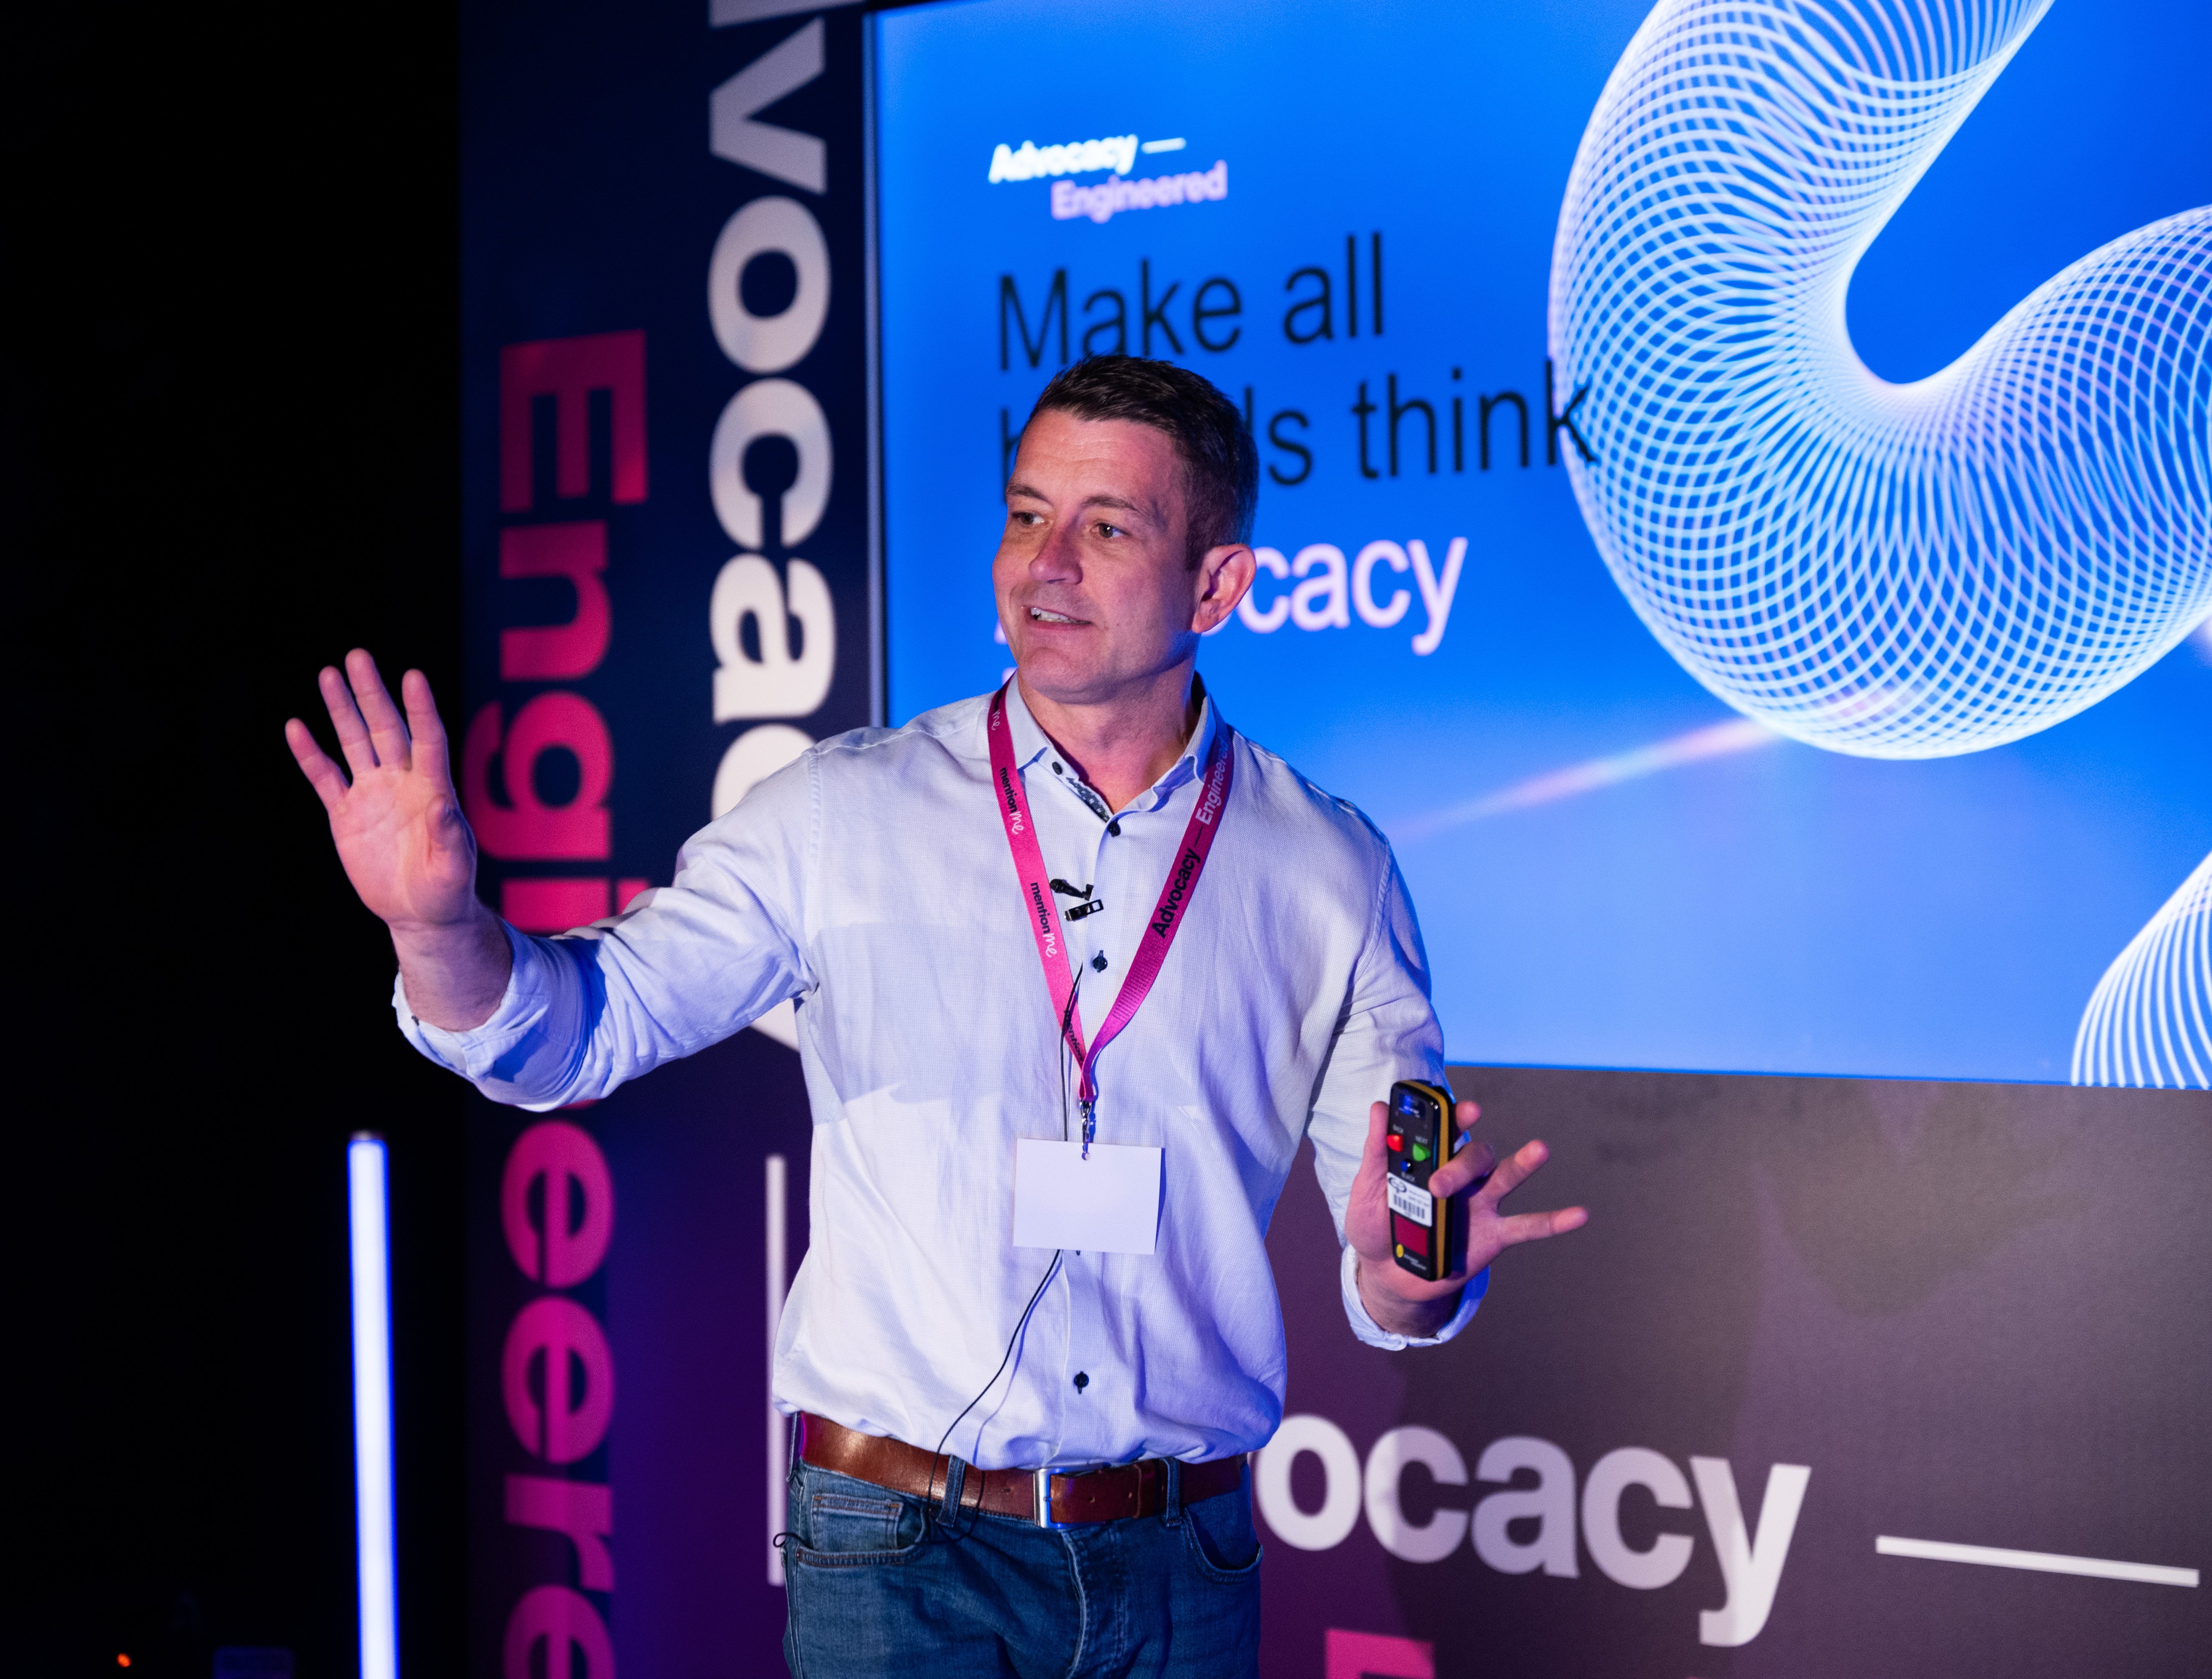 Darren Loveday, Senior VP Business Development & Solutions Consulting at Mention Me showed how advocacy weaves into every moment of the customer journey